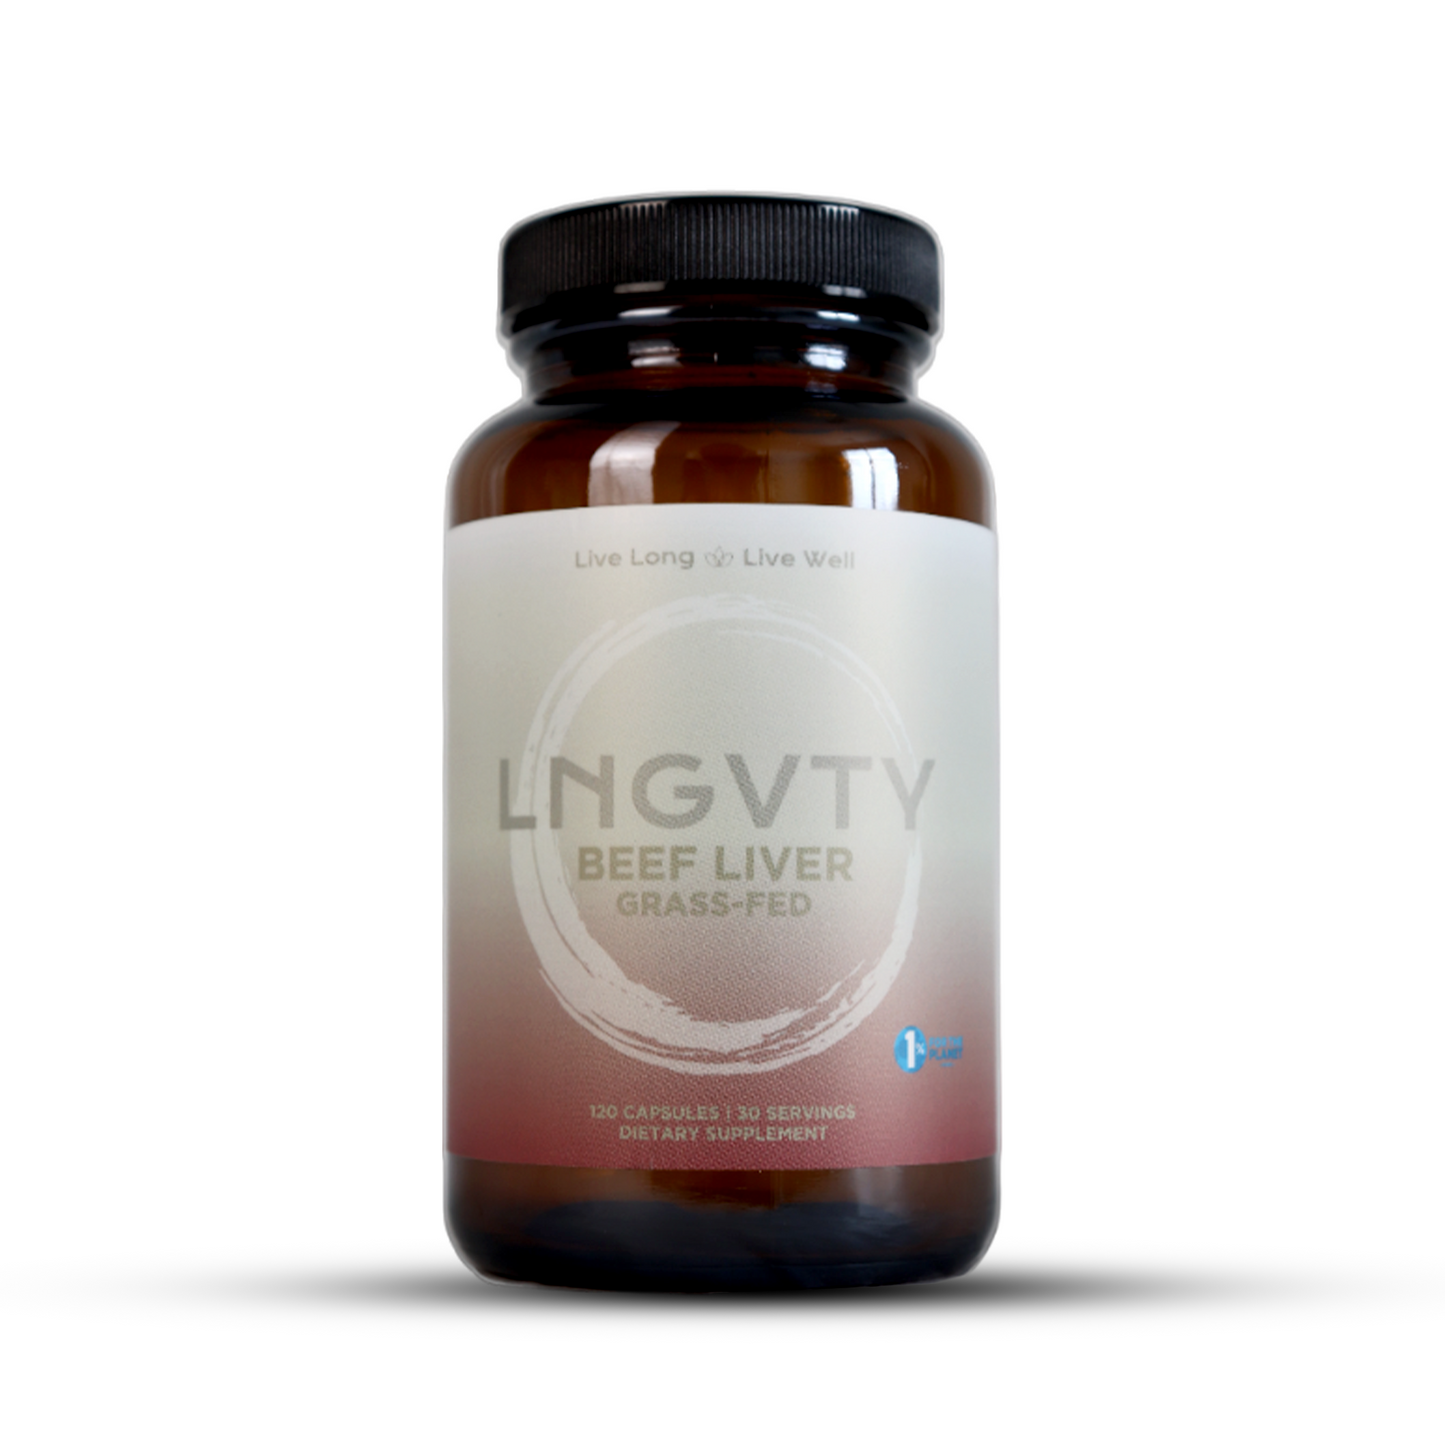 LNGVTY Grass-Fed Beef Liver Capsules